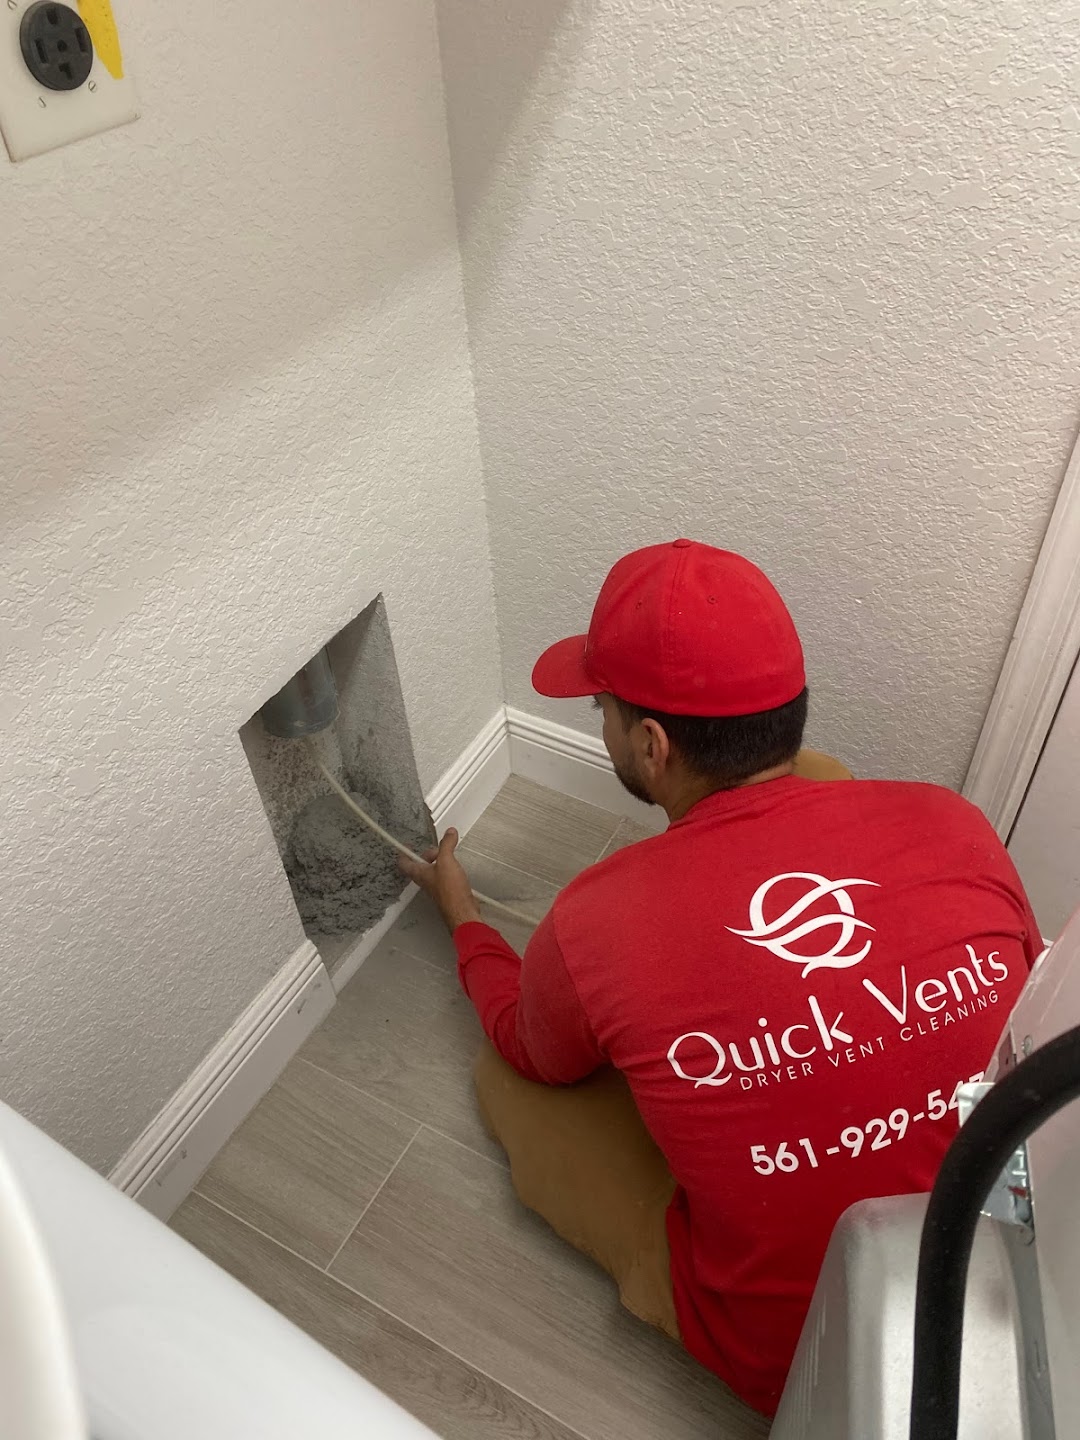 Quick Appliance Services and Dryer Vent Cleaning